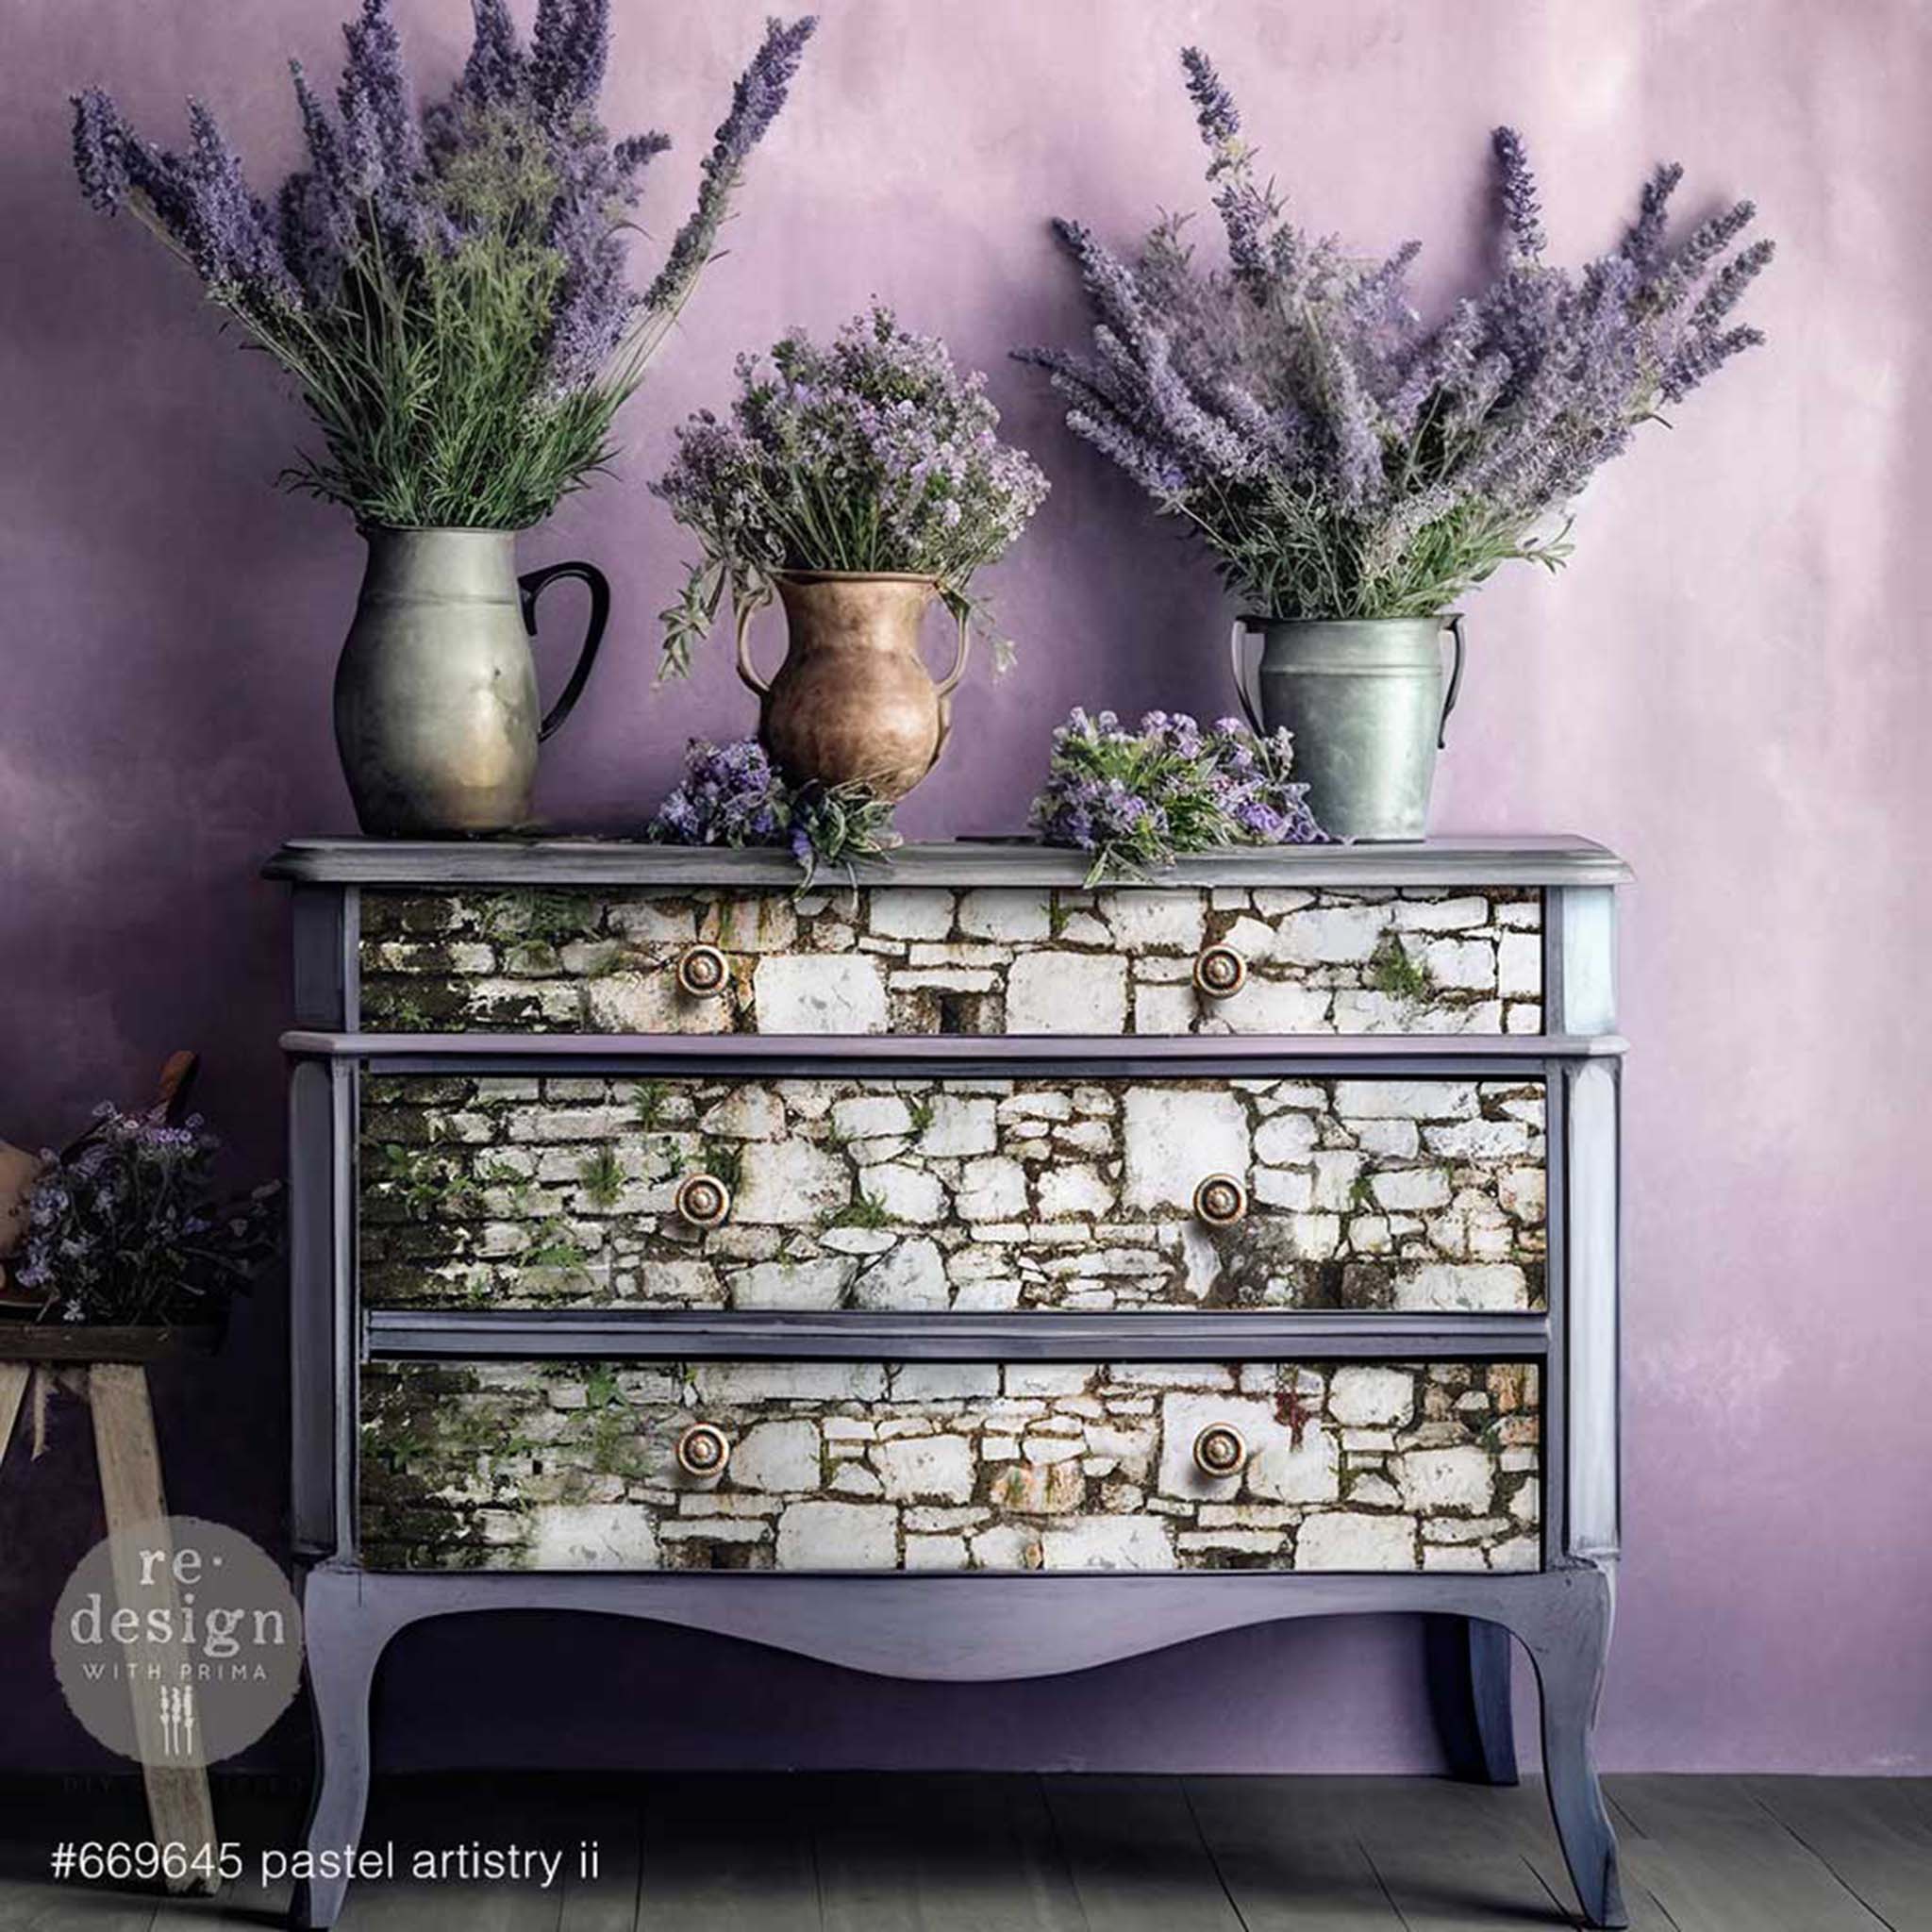 A vintage 3-drawer dresser is painted lavender and features ReDesign with Prima's Pastels Artistry 2 on the drawers.